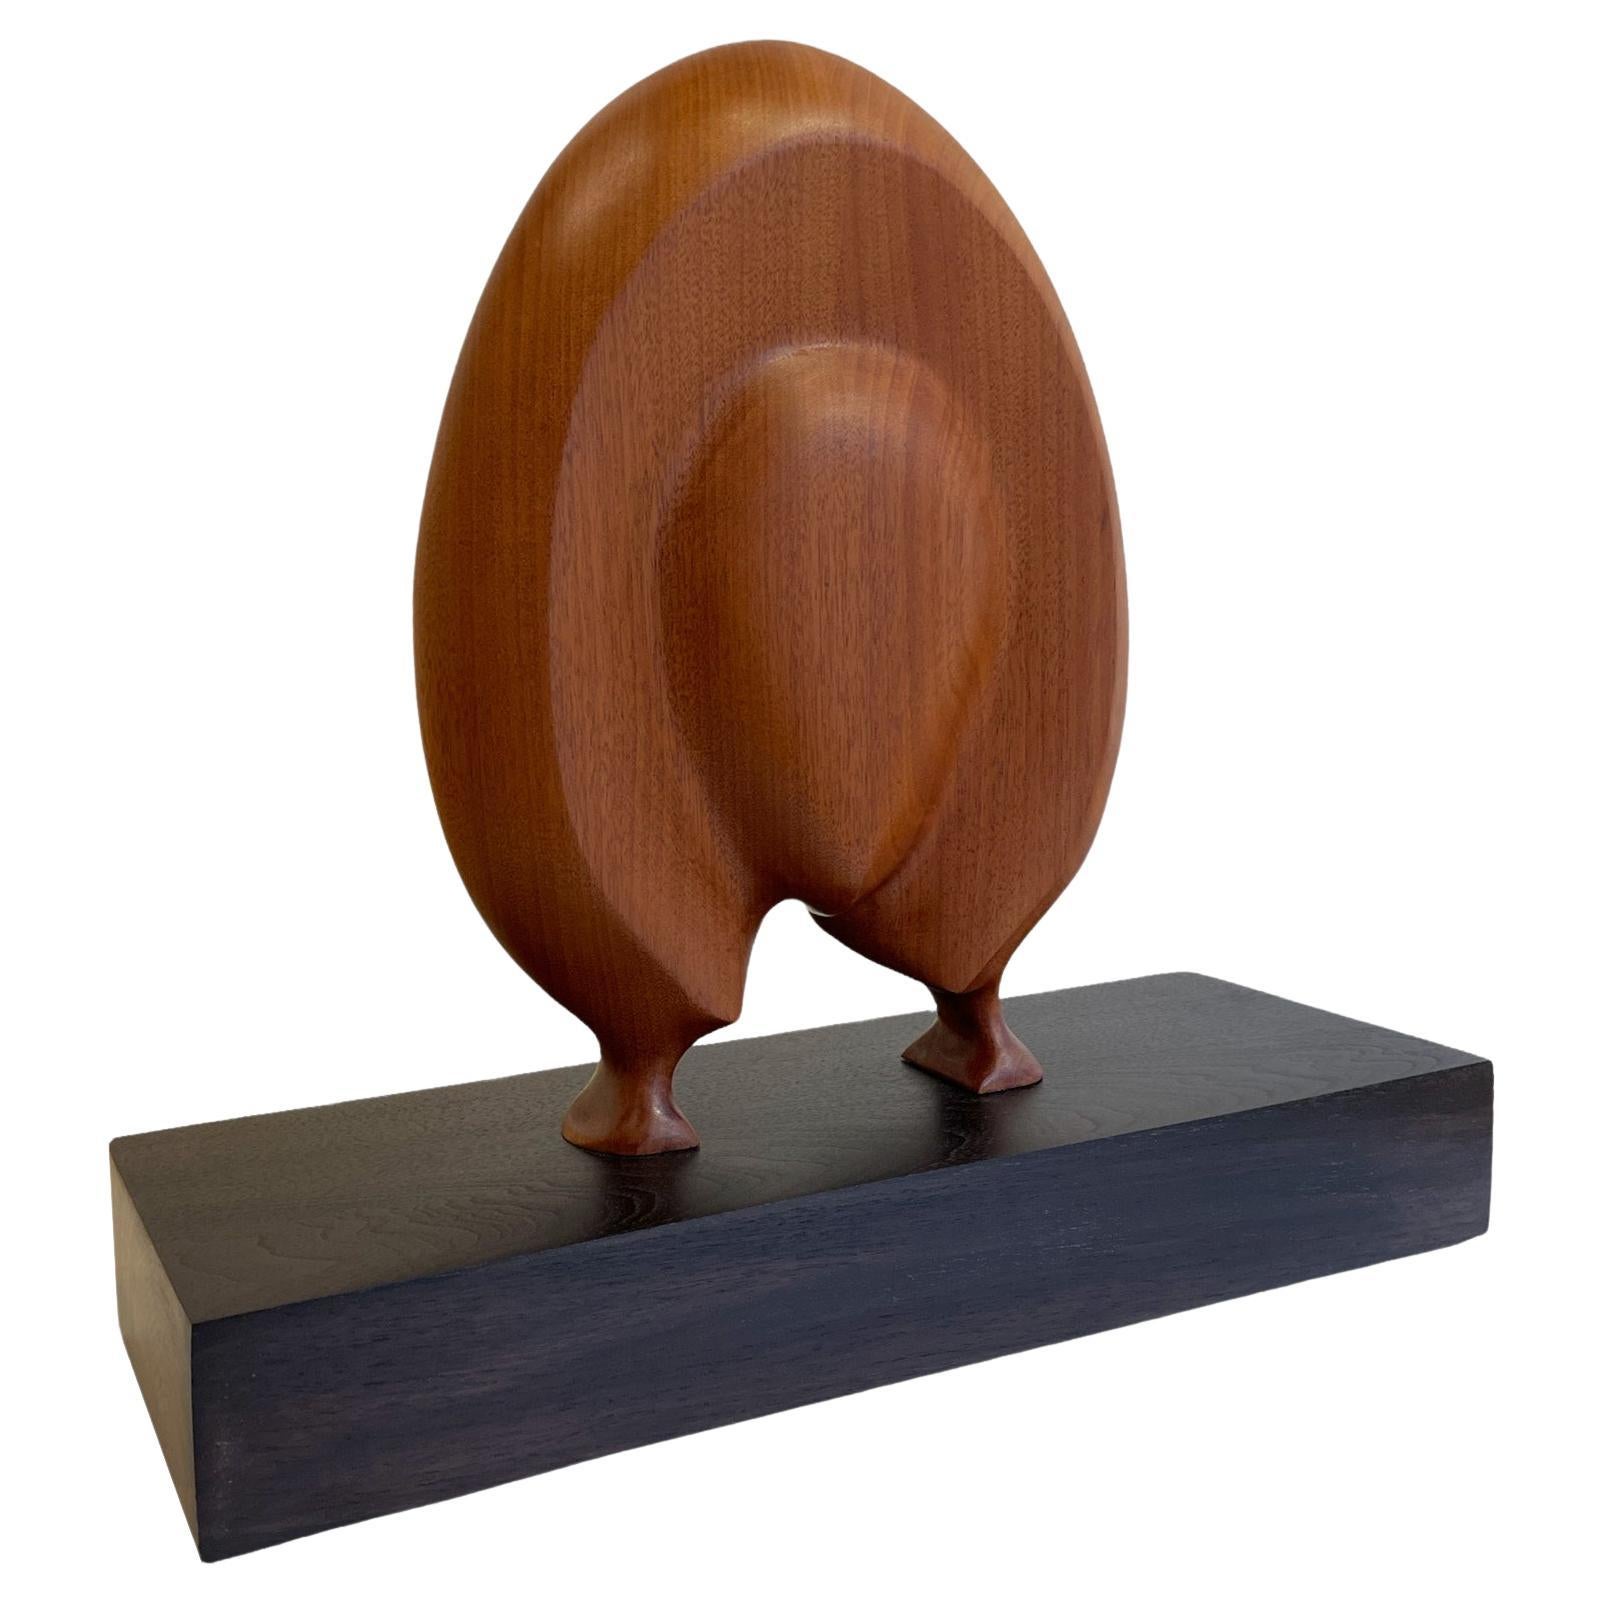 Submission, Mahogany, Hand Carved Wooden Sculpture on Dark Base